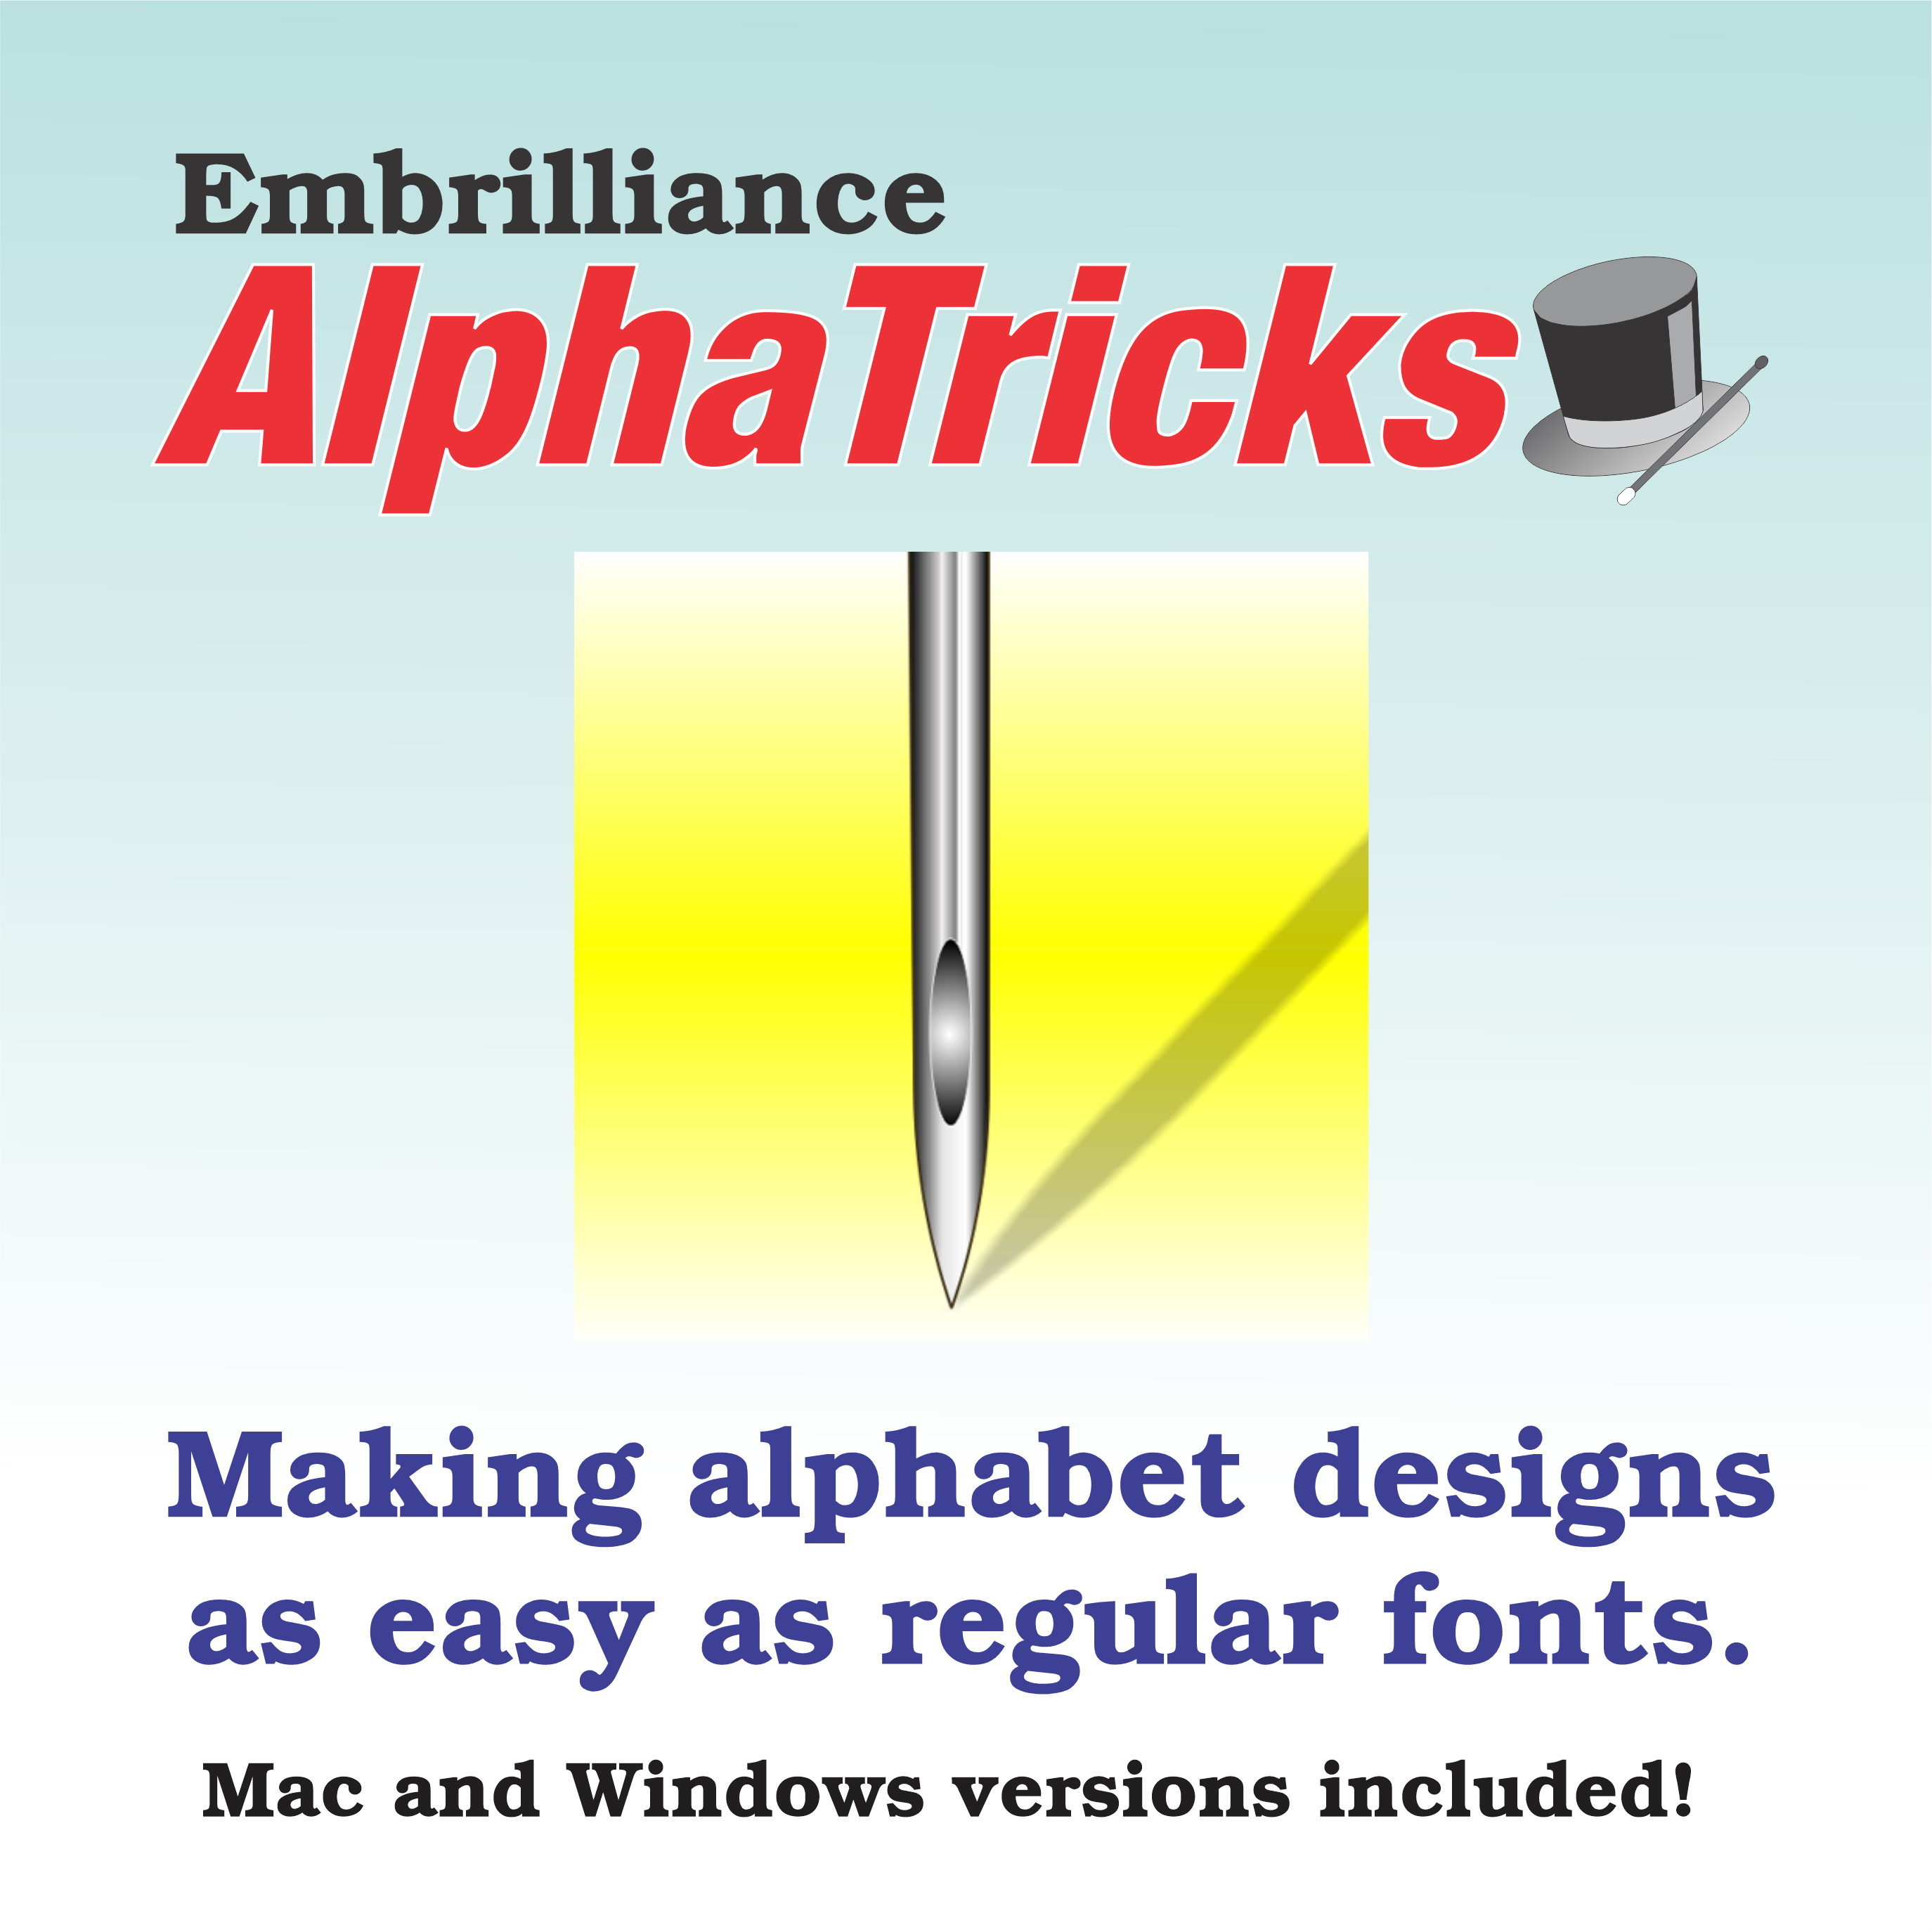 free mac embroidery software